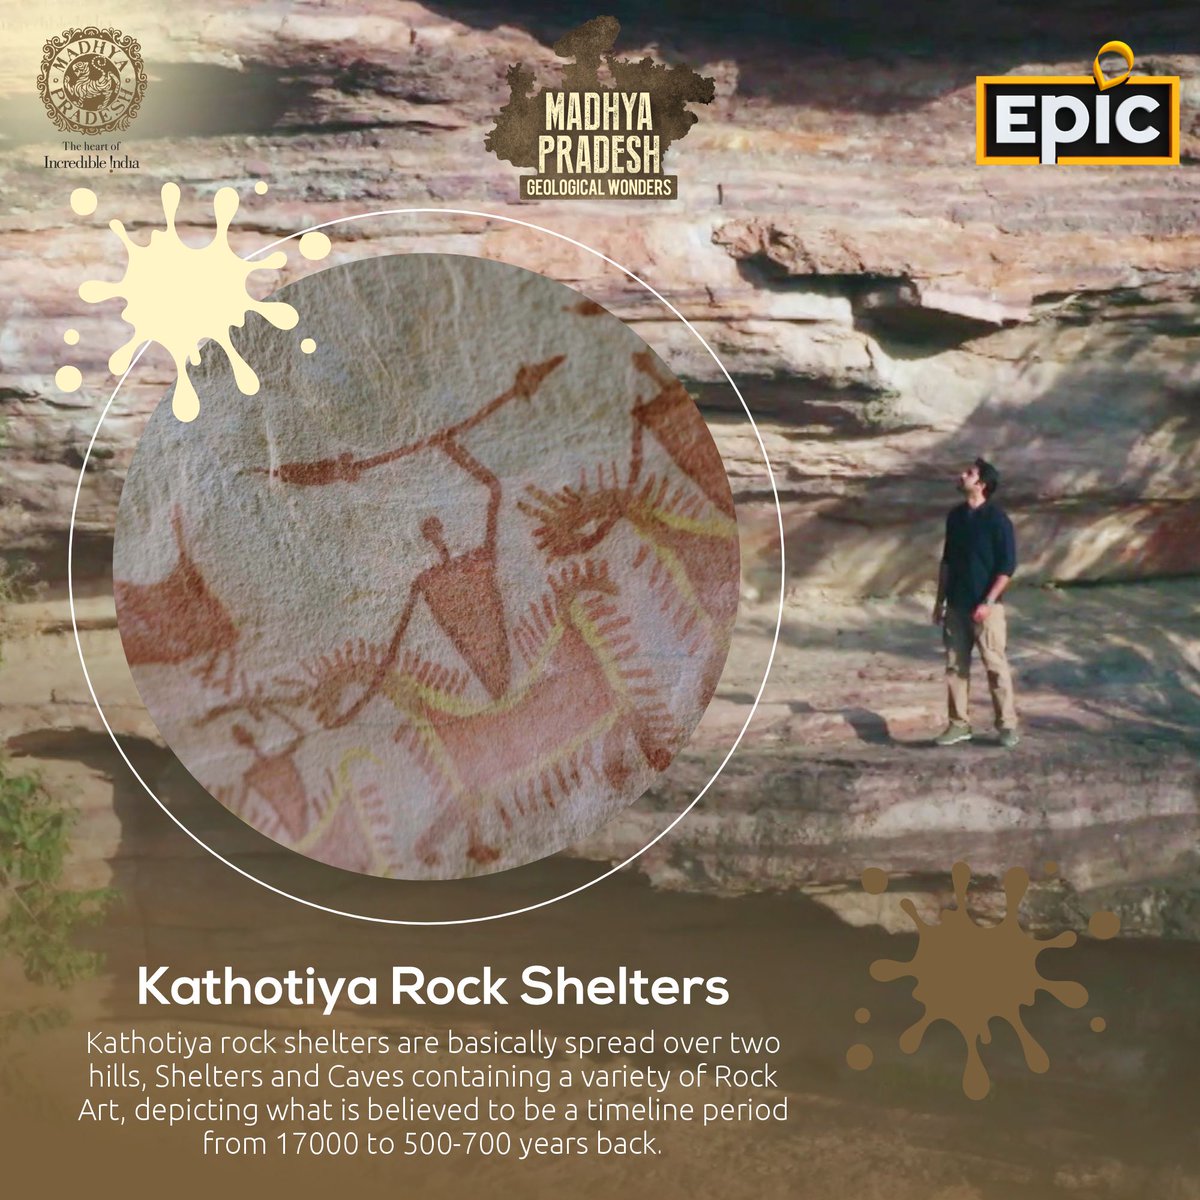 Dive into the wonders of Kathotiya rock shelter in Madhya Pradesh! 🌄 A captivating blend of ancient stories and awe-inspiring rock formations awaits your exploration. 🏞️ An absolute haven for those enchanted by nature and history alike! #MPGeologicalWonders #EPICChannel